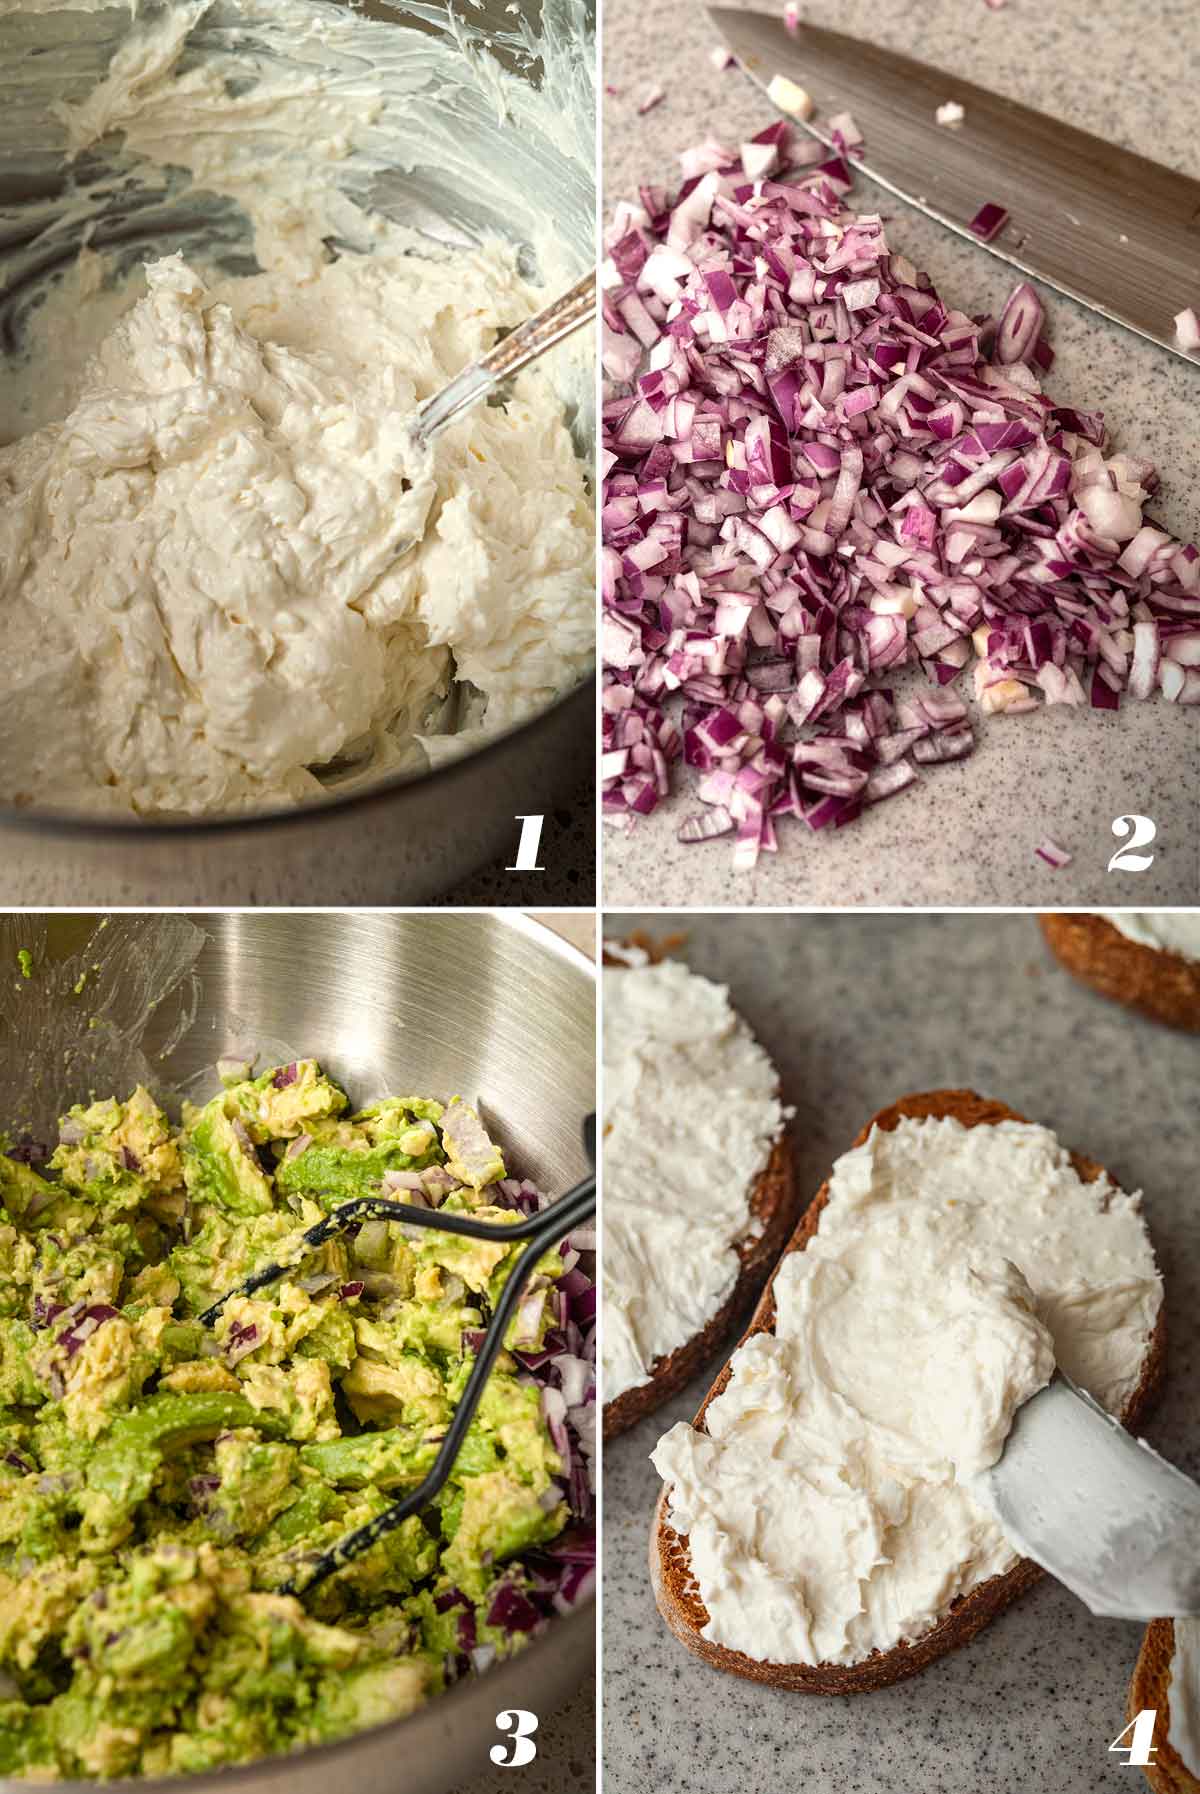 A collage of 4 numbered images showing how to prep ingredients for avocado toast.